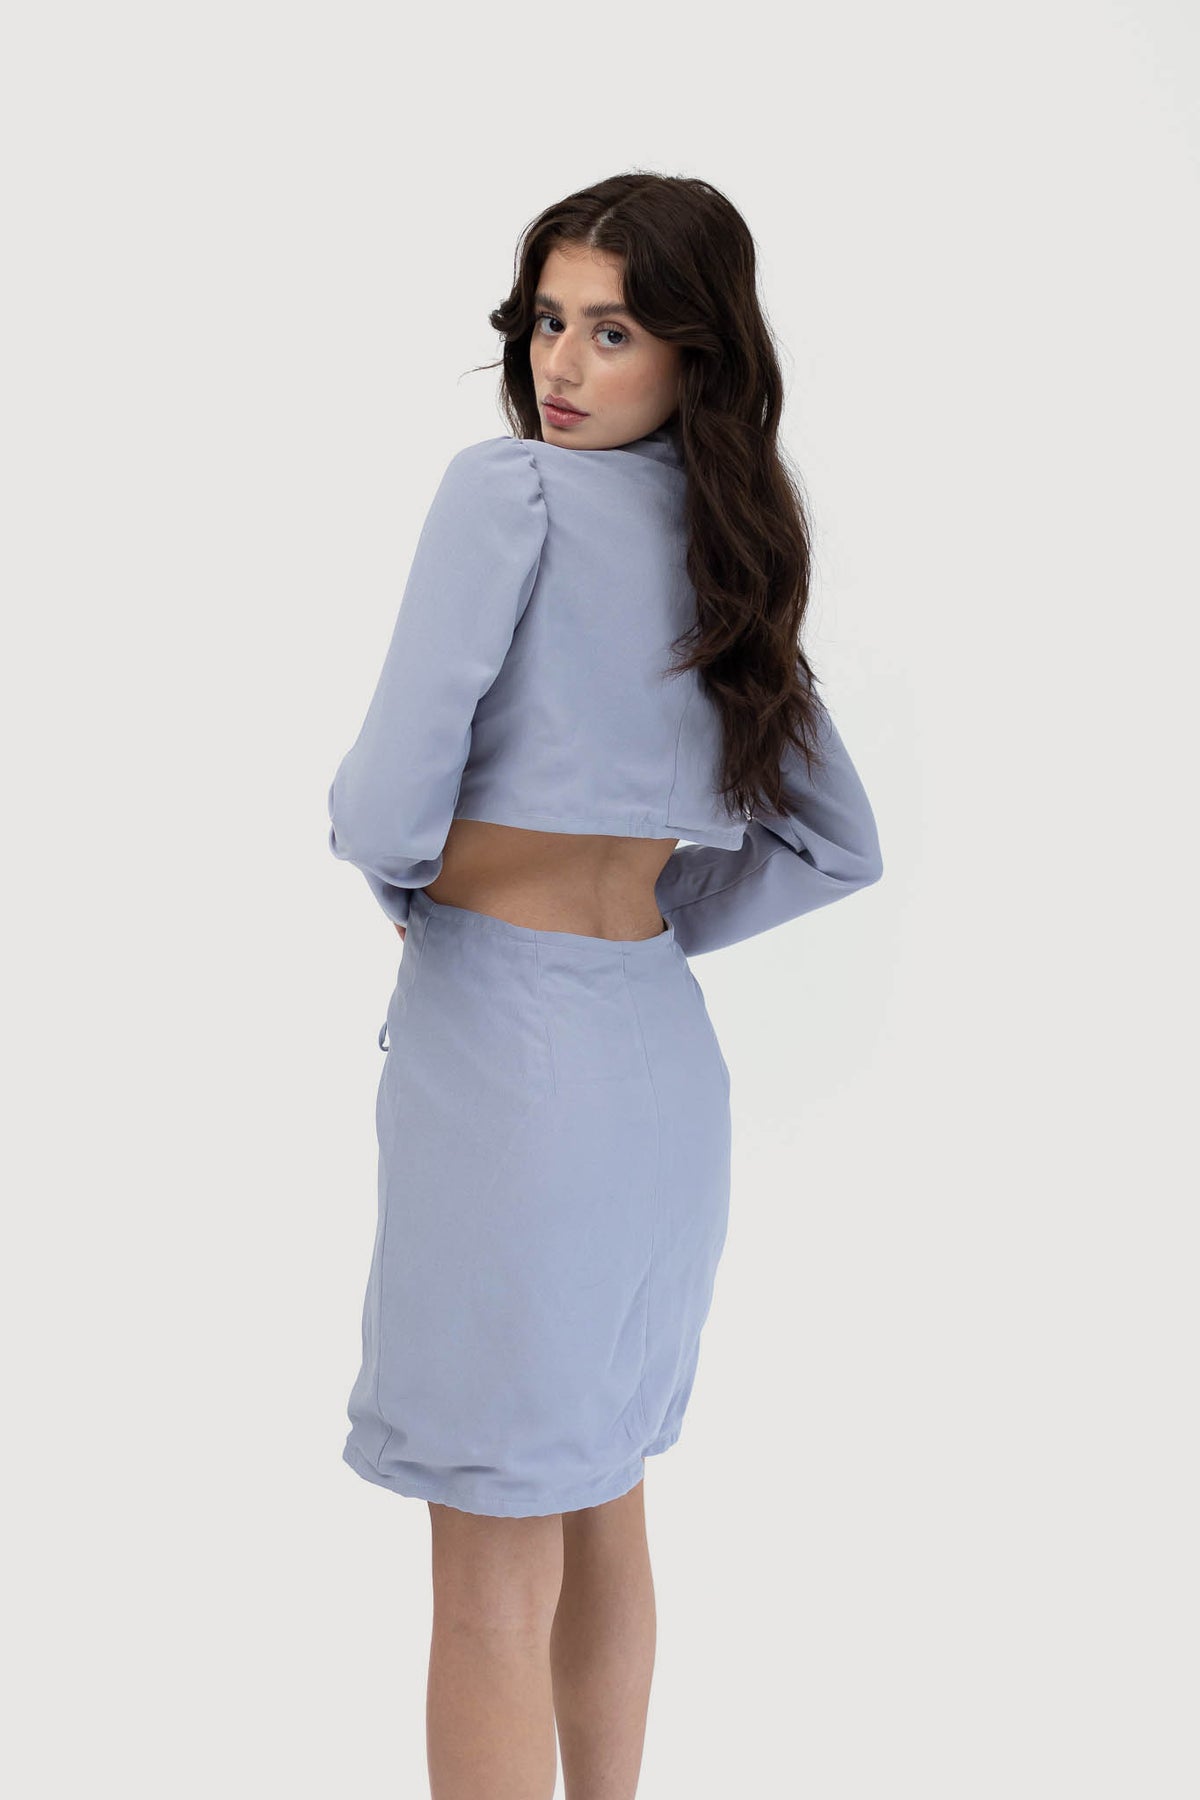 Model wearing an elegant Nepal blue dress with long sleeves, a structured collar, lace-up front detail, and side cut-outs. Showing back side cutout.